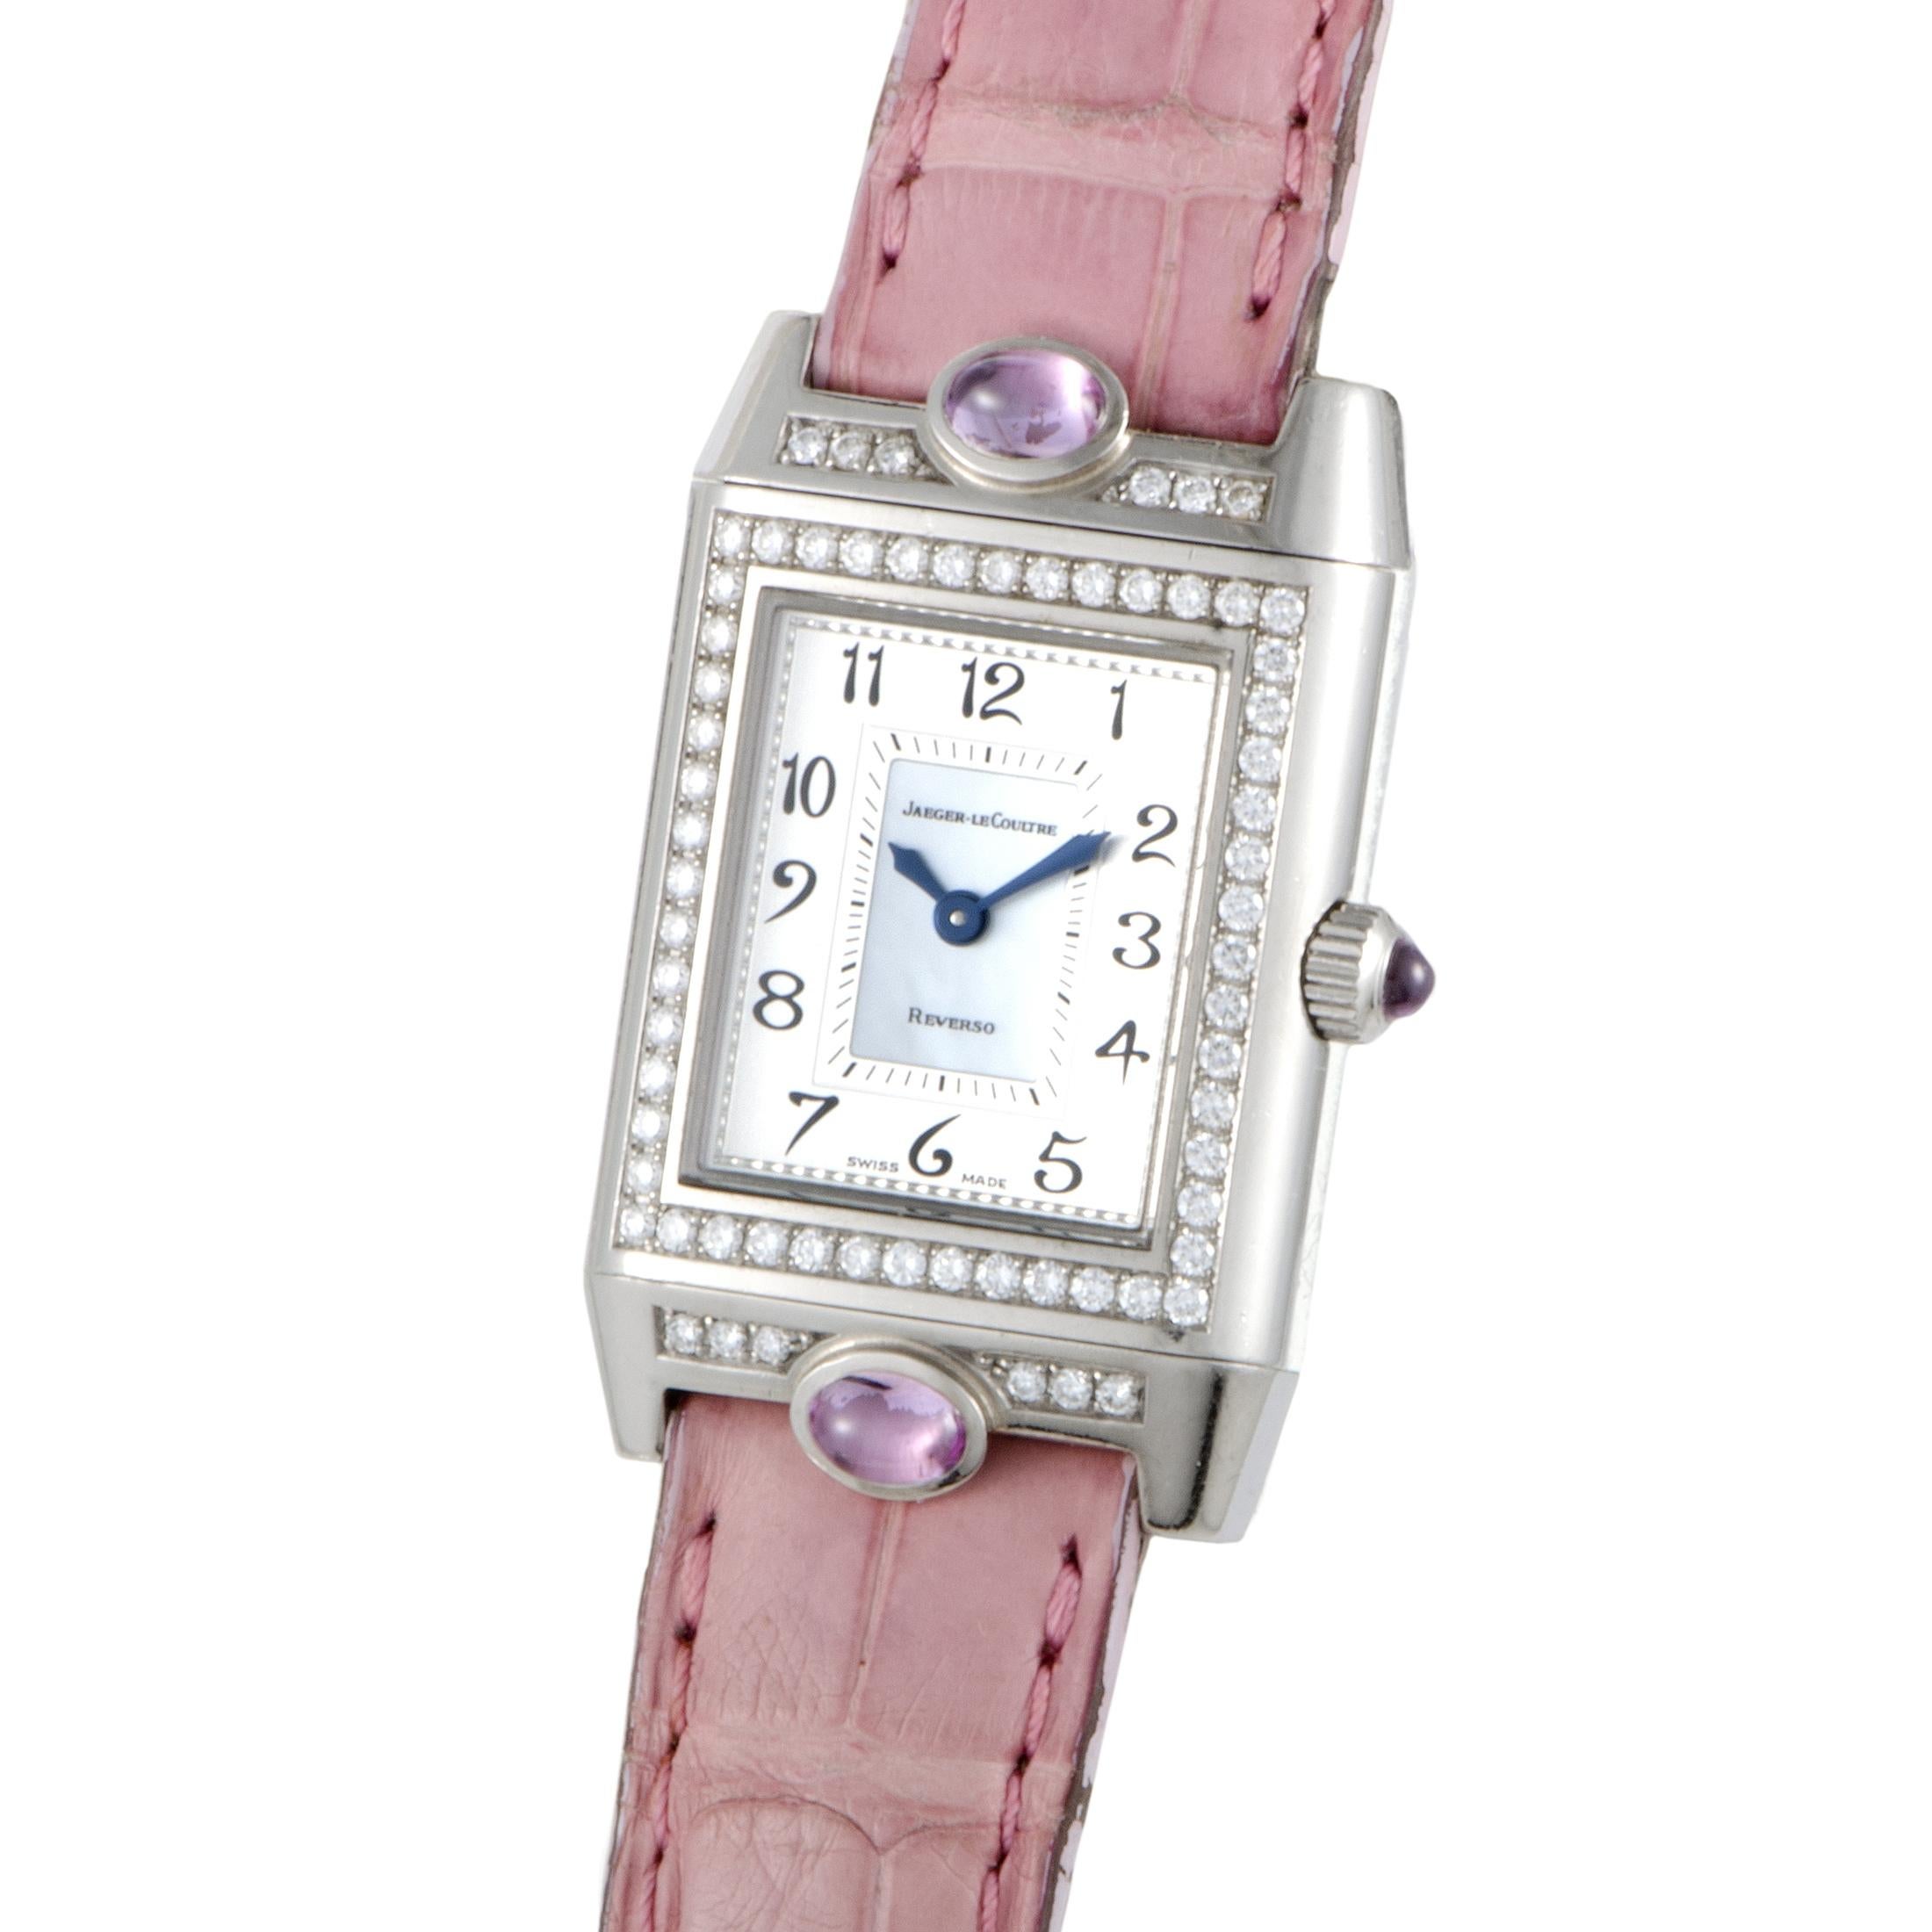 Jaeger LeCoultre Reverso Joaillerie Cabochons. 18K white gold case and a rectangular bezel made from the same metal and set with diamonds. Pink hand stitched leather strap with deployment buckle, silver dial with Black Arabic numerals, Three light